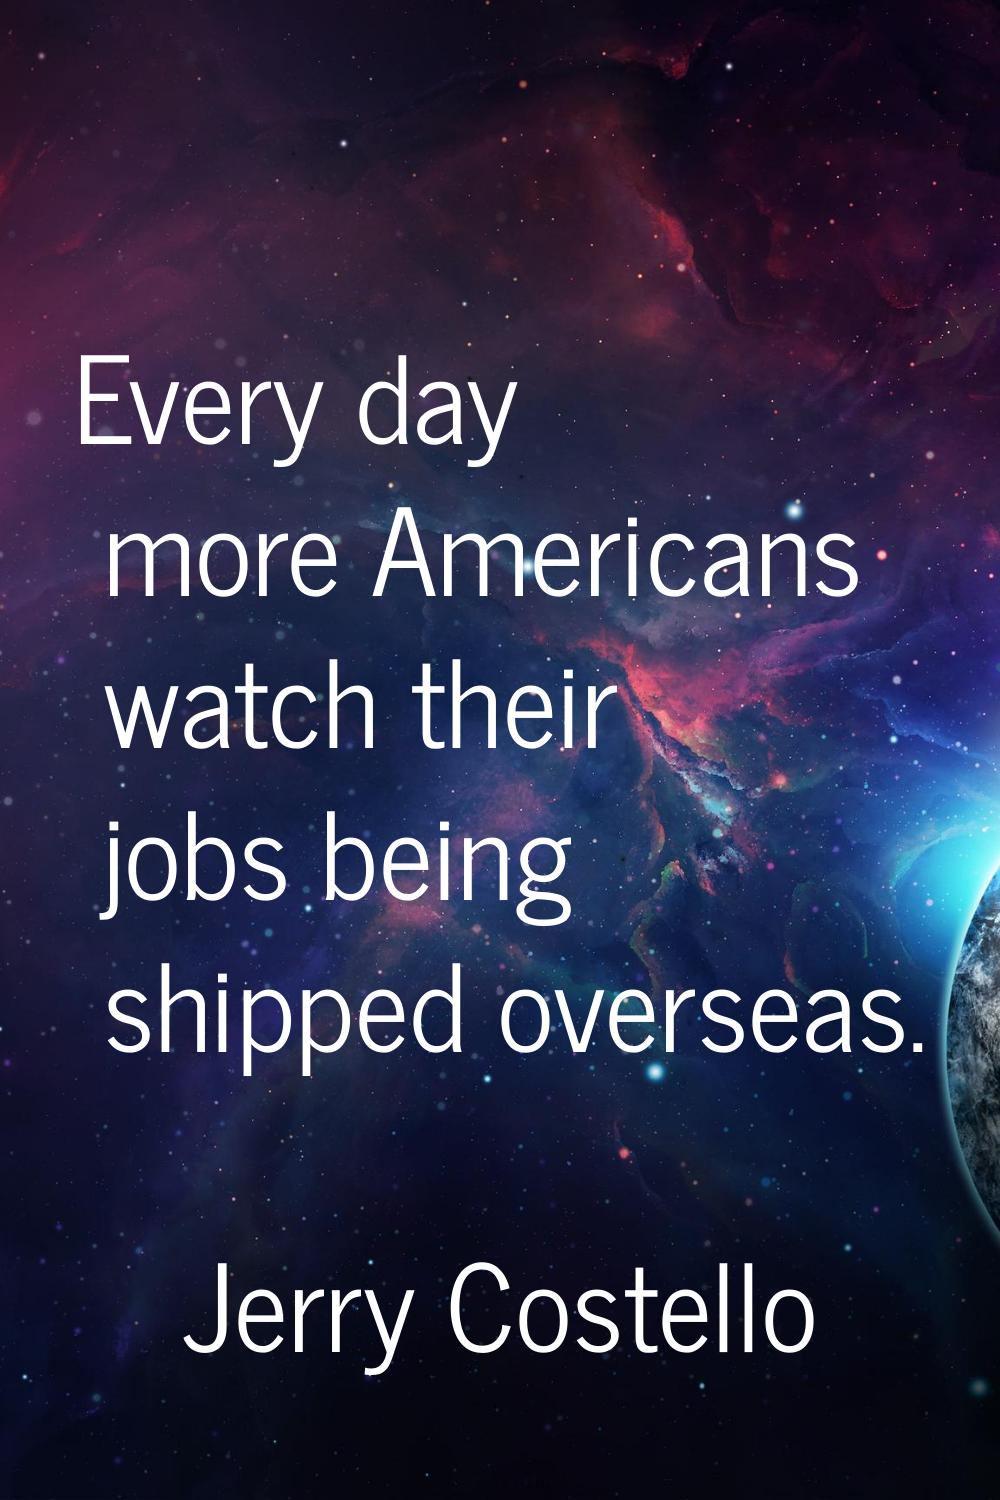 Every day more Americans watch their jobs being shipped overseas.